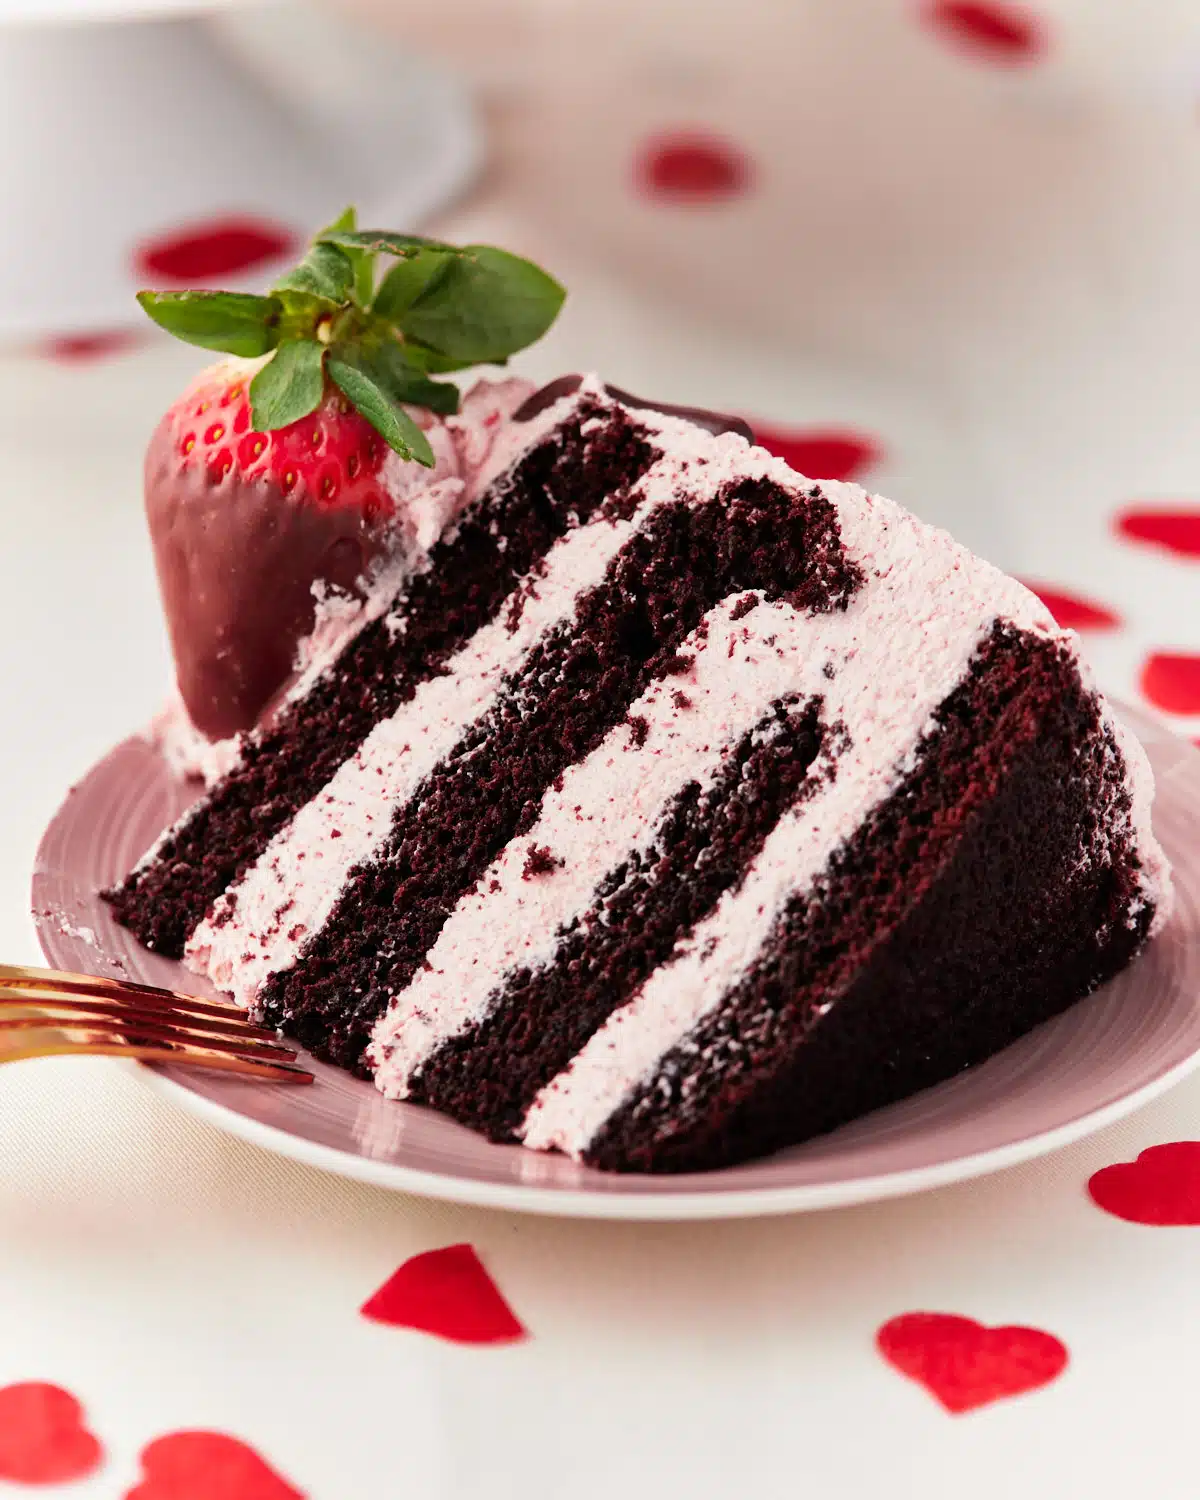 slice of chocolate strawberry cake with pink strawberry frosting inside.